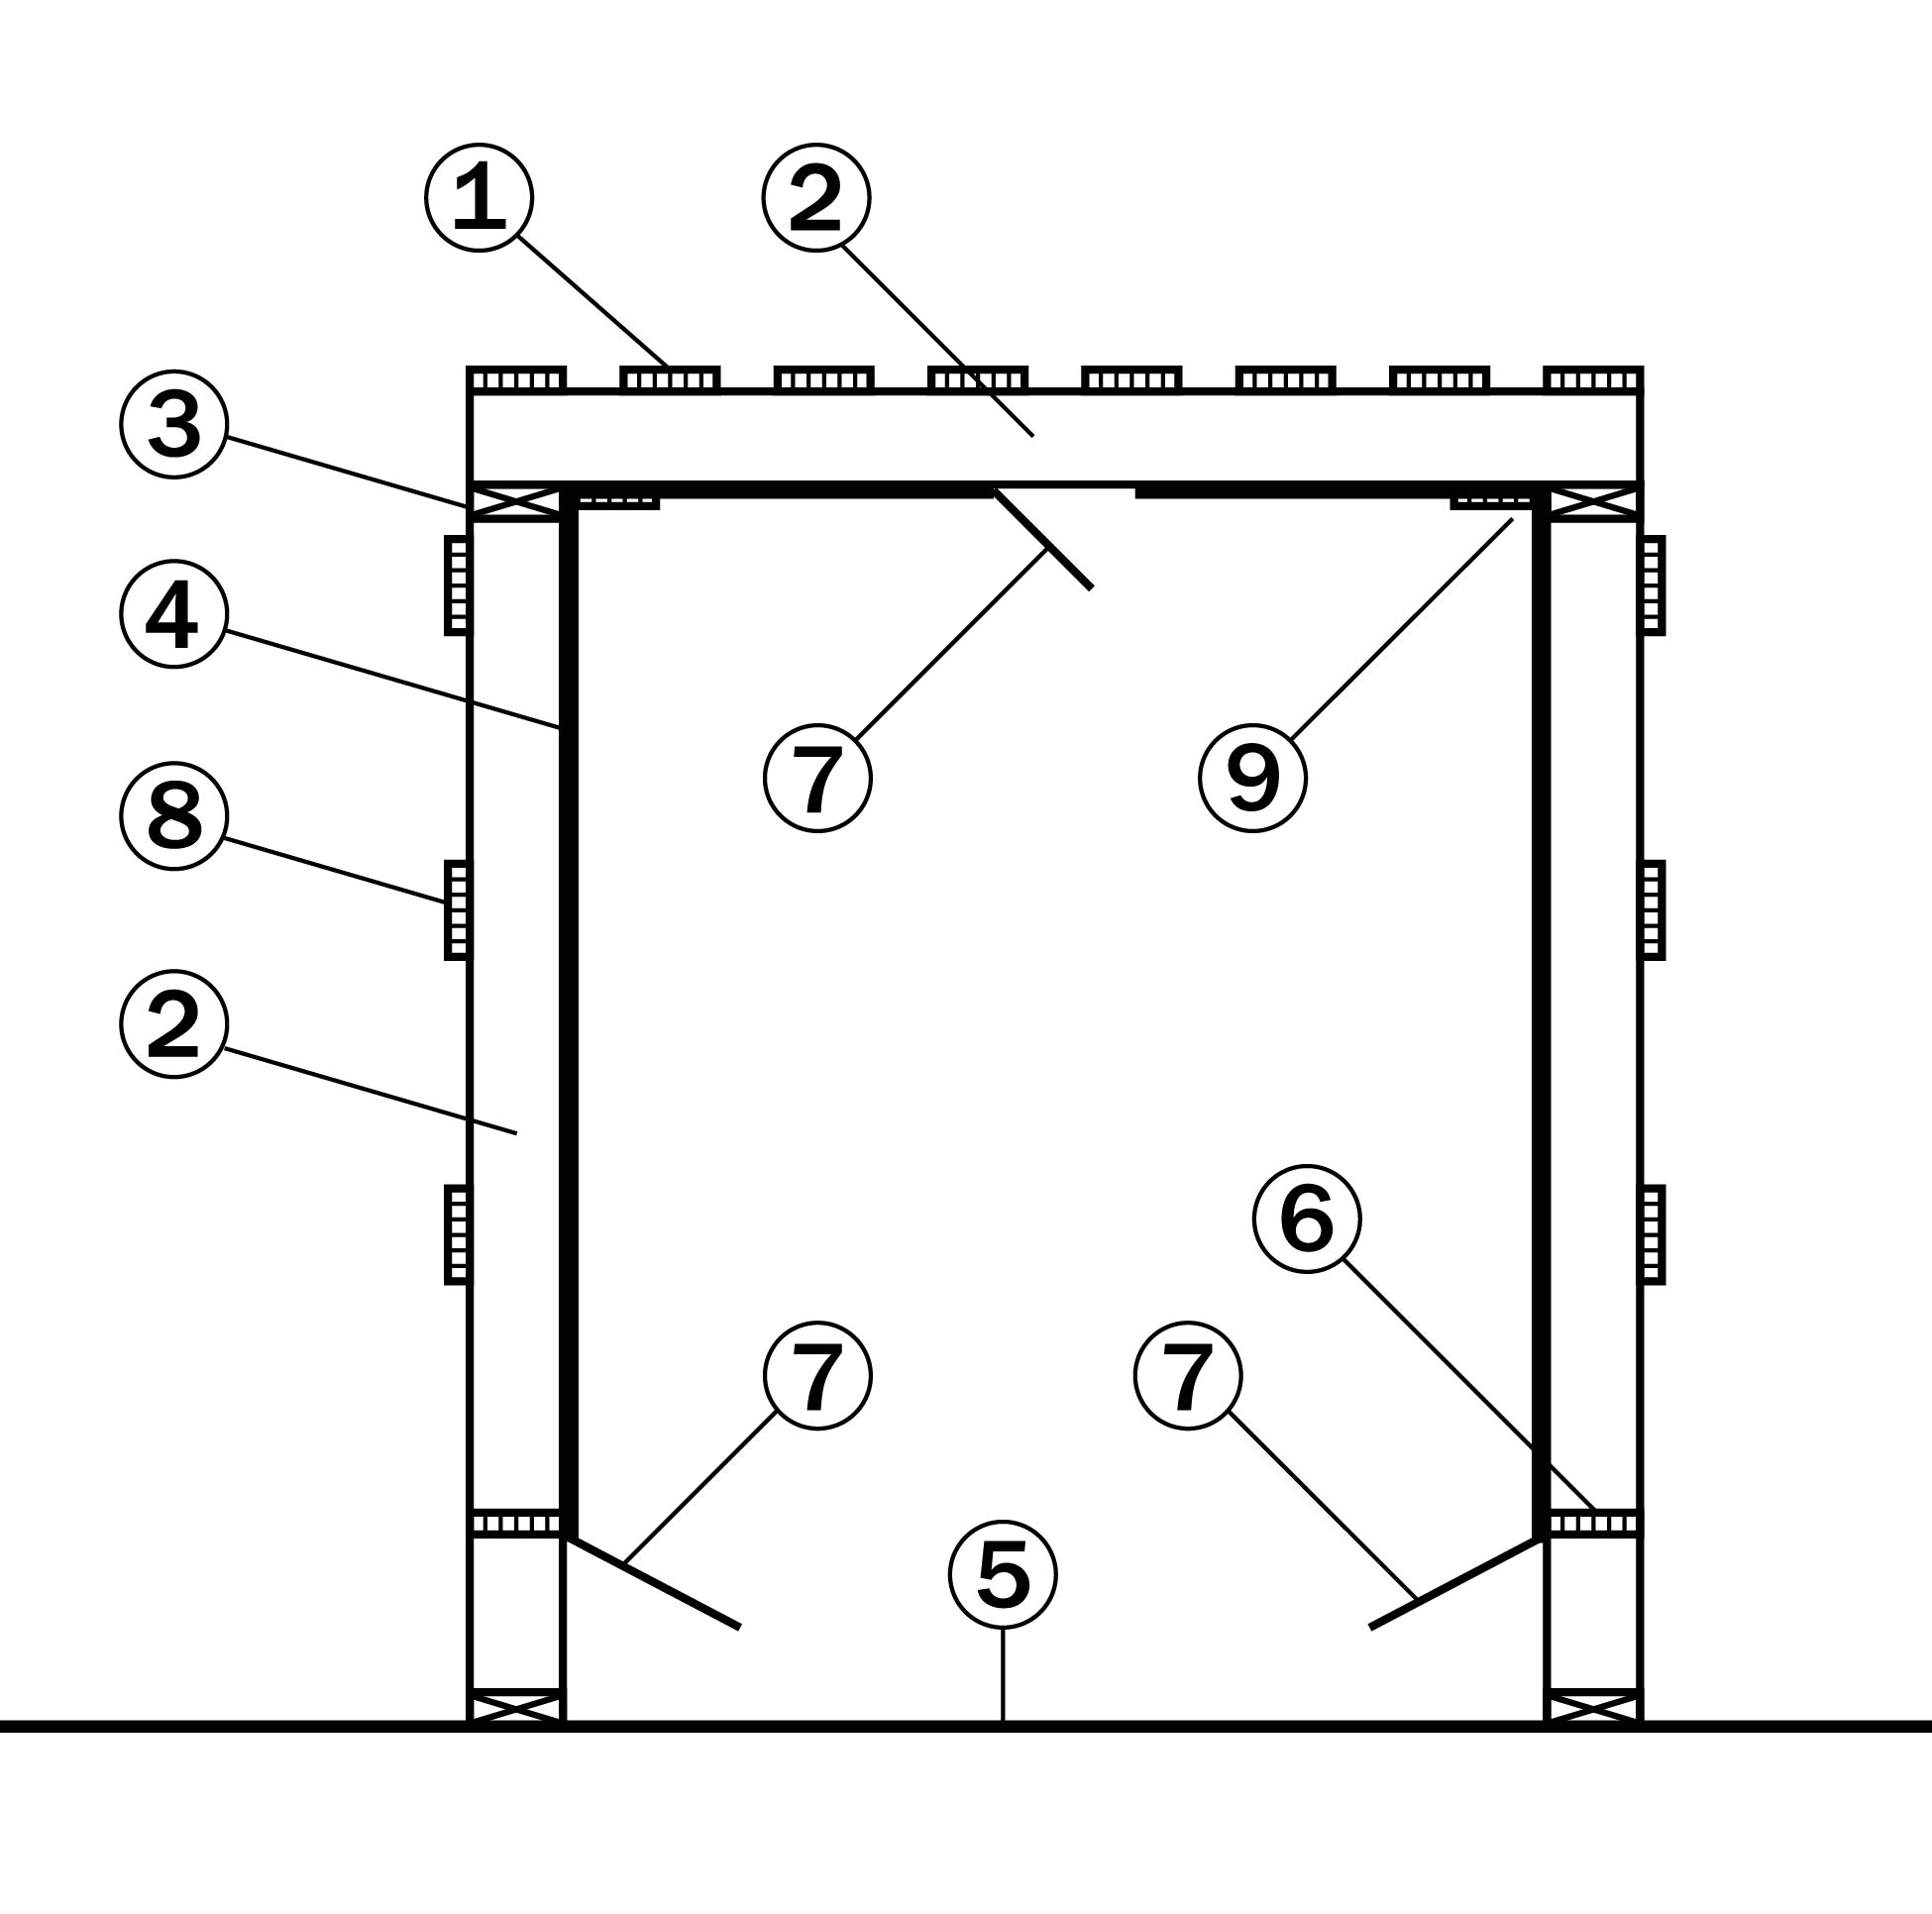 A lined rectangular air duct without a slatted floor section and numbers pointing to various sections of the drawing